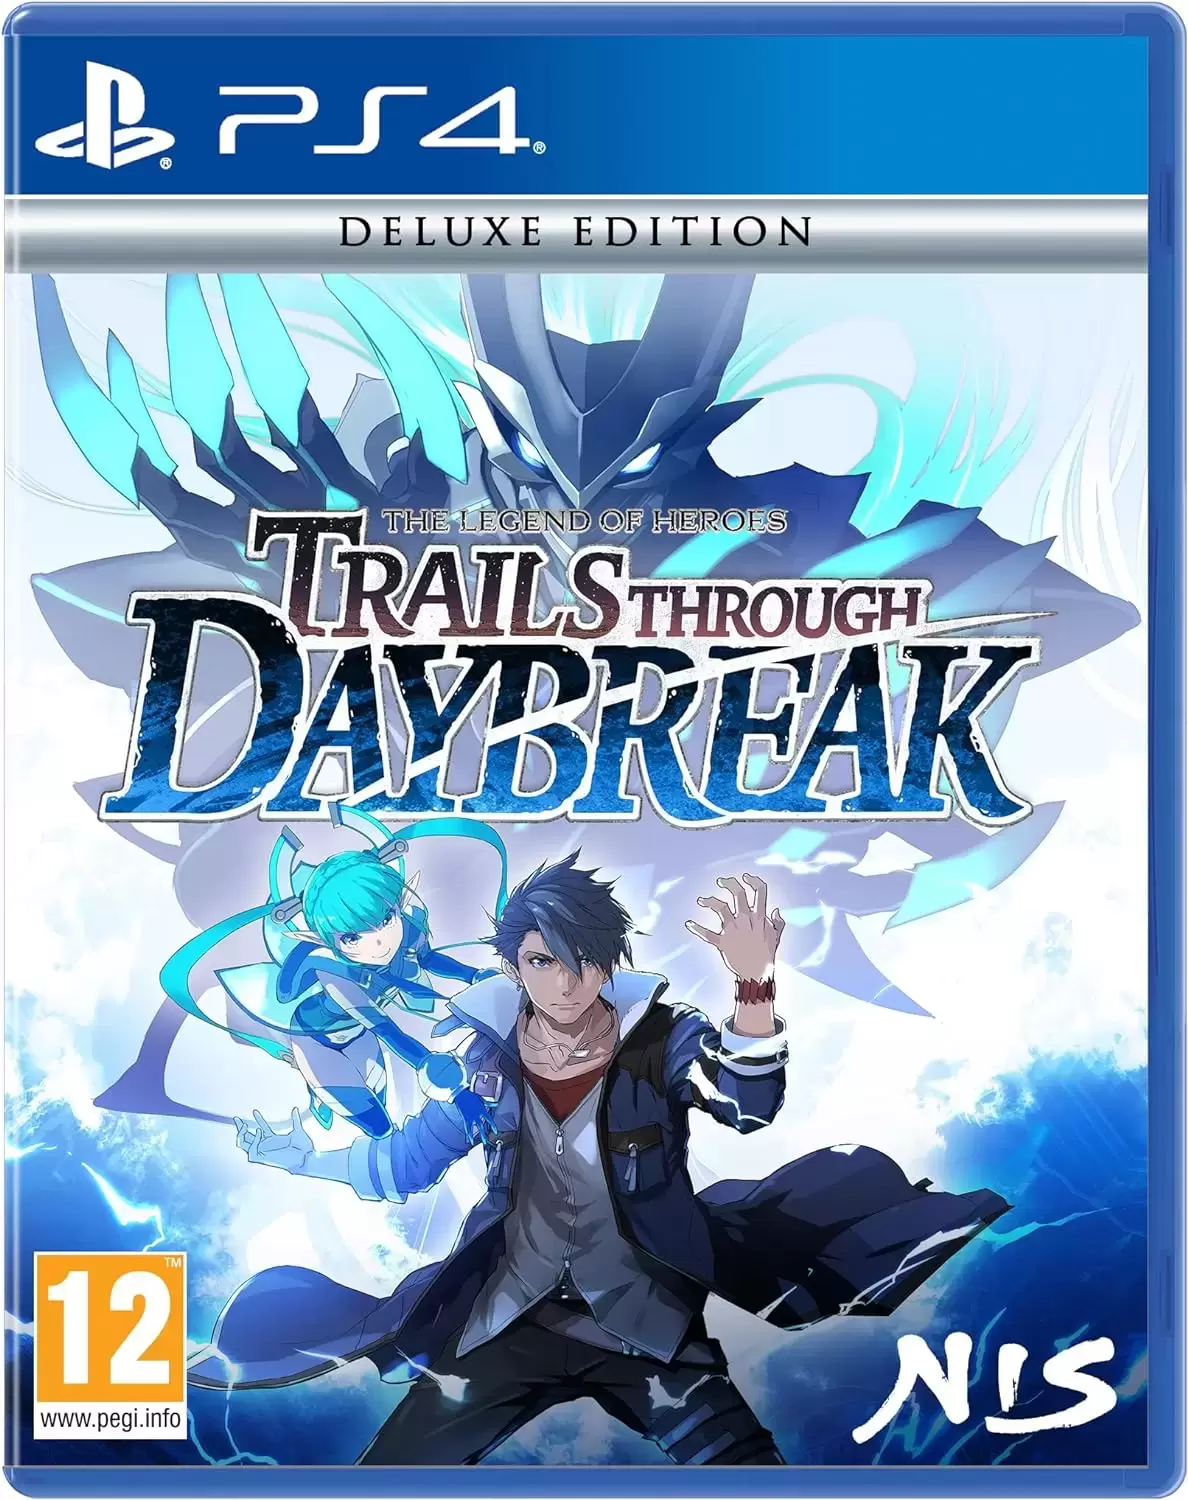 PS4 Games - The Legend of Heroes : Trails Through Daybreak